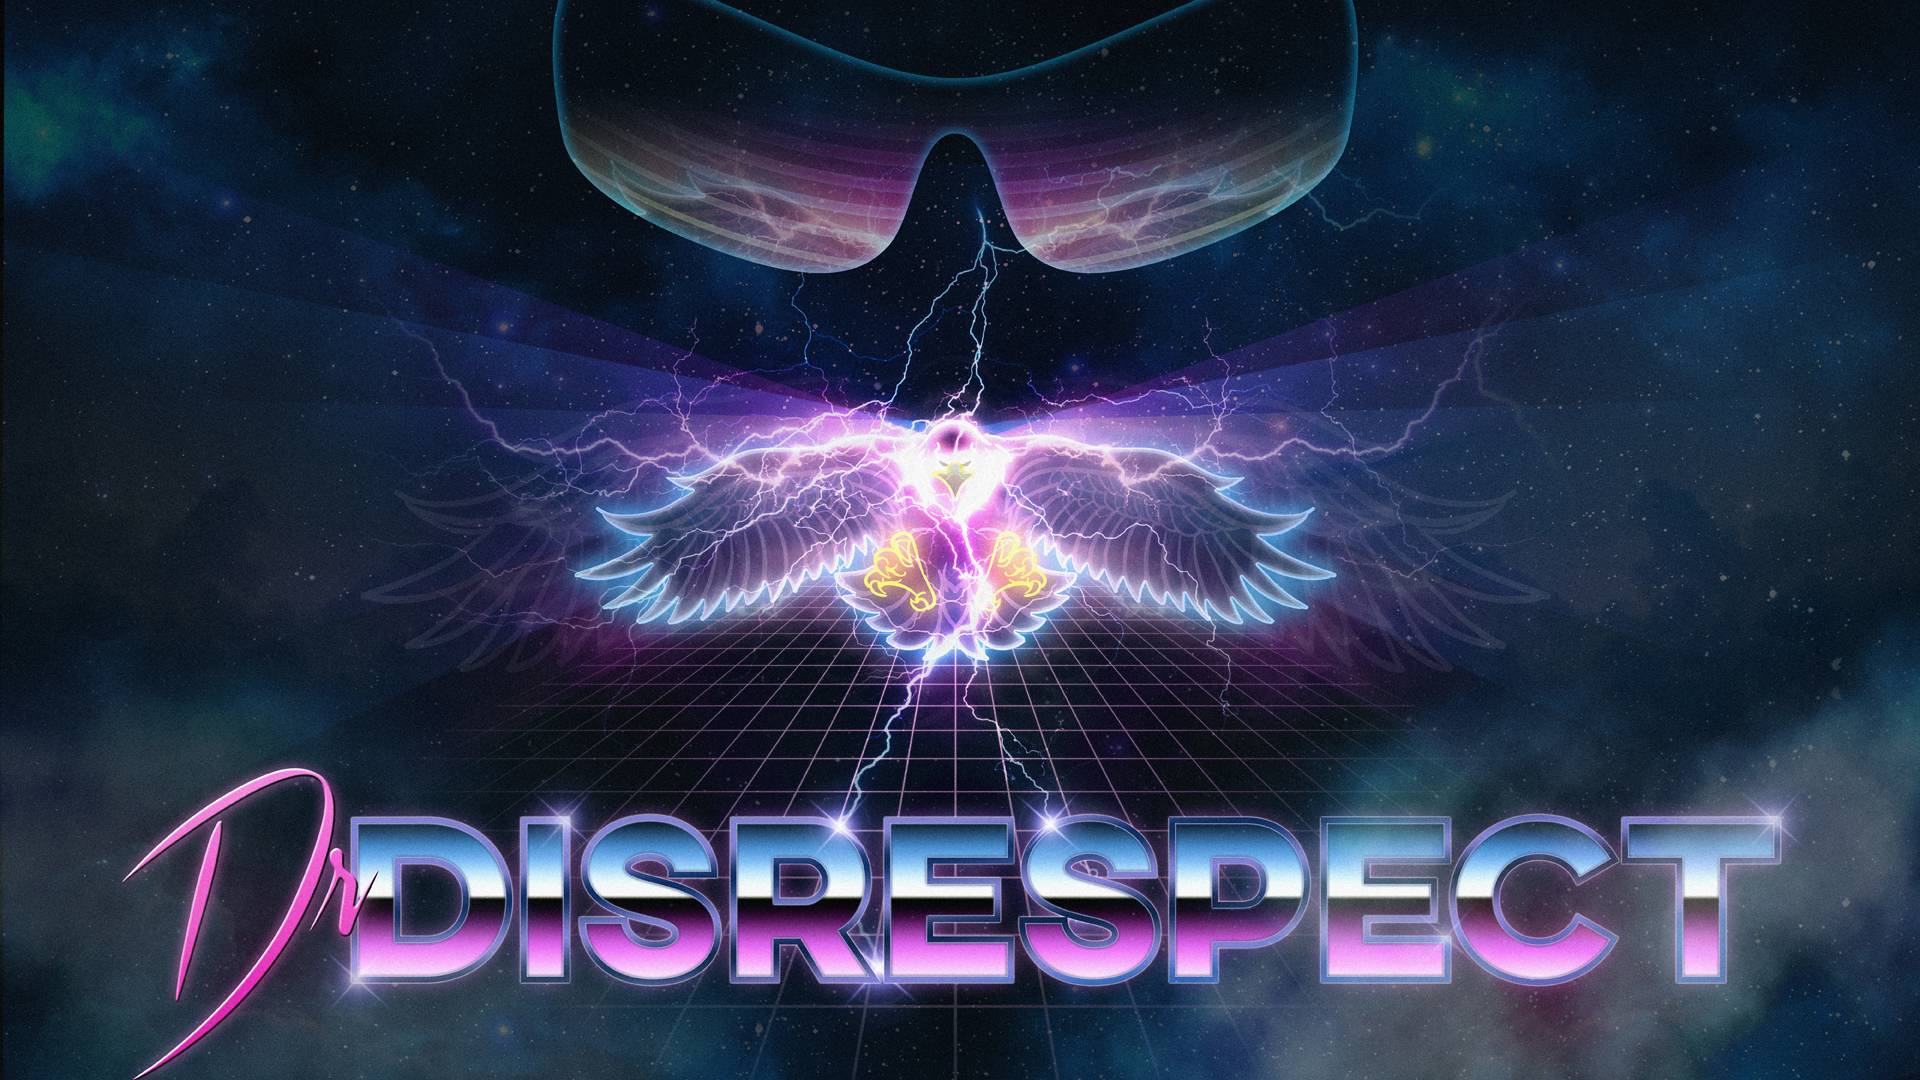 I made a wallpaper for one of my favorite streamers, Dr. Disrespect